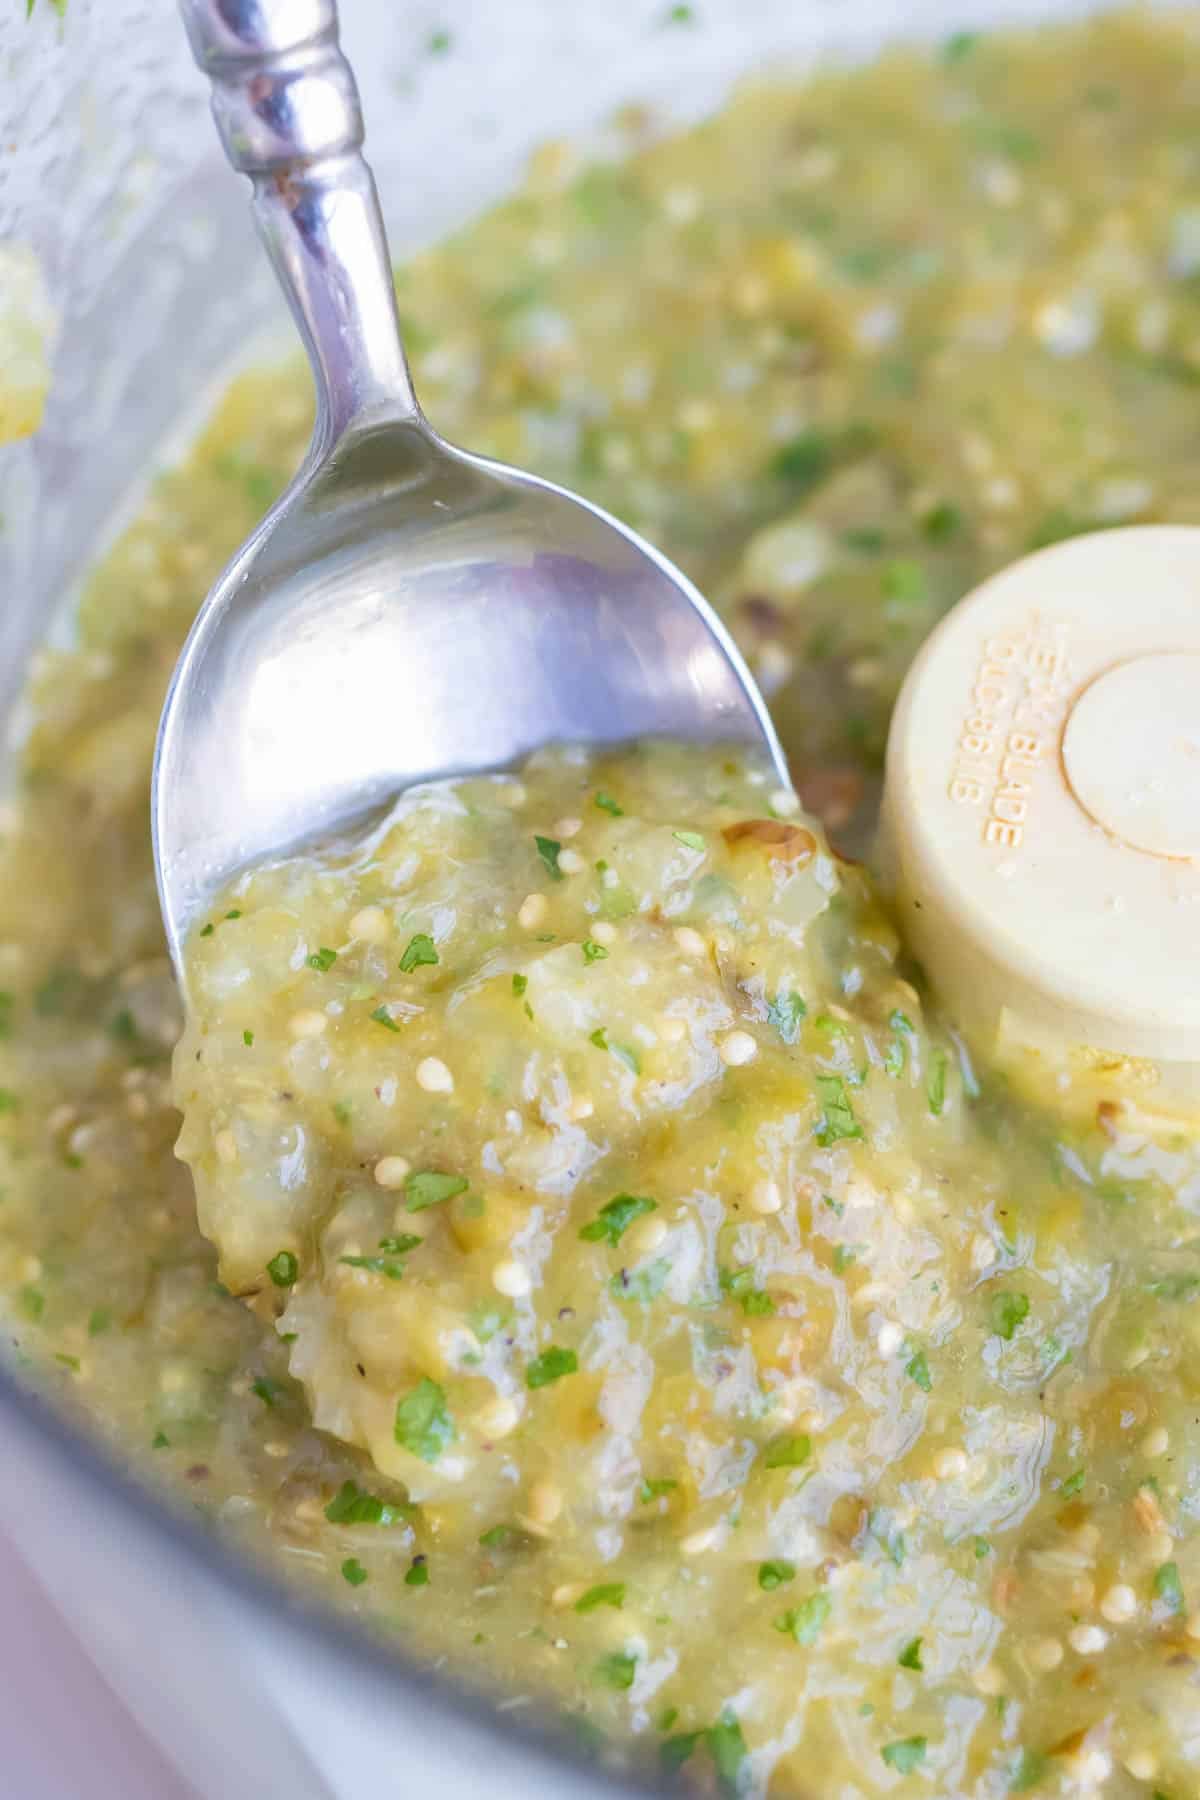 Tomatillo salsa is shown up close with a metal spoon.